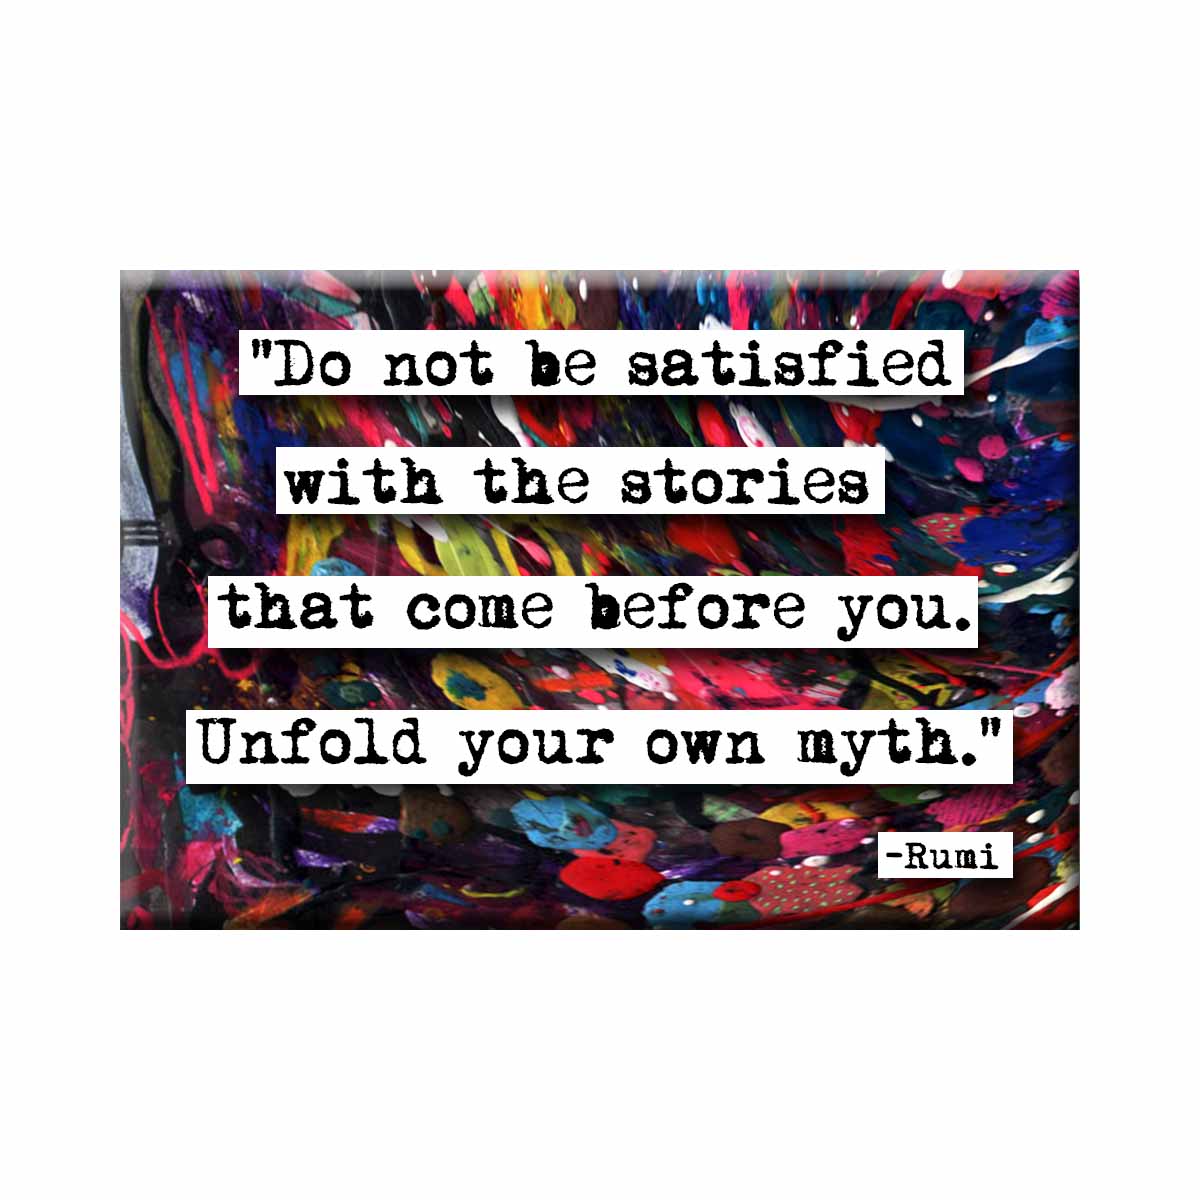 Rumi Unfold Your Own Myth Refrigerator Magnet (no.977)